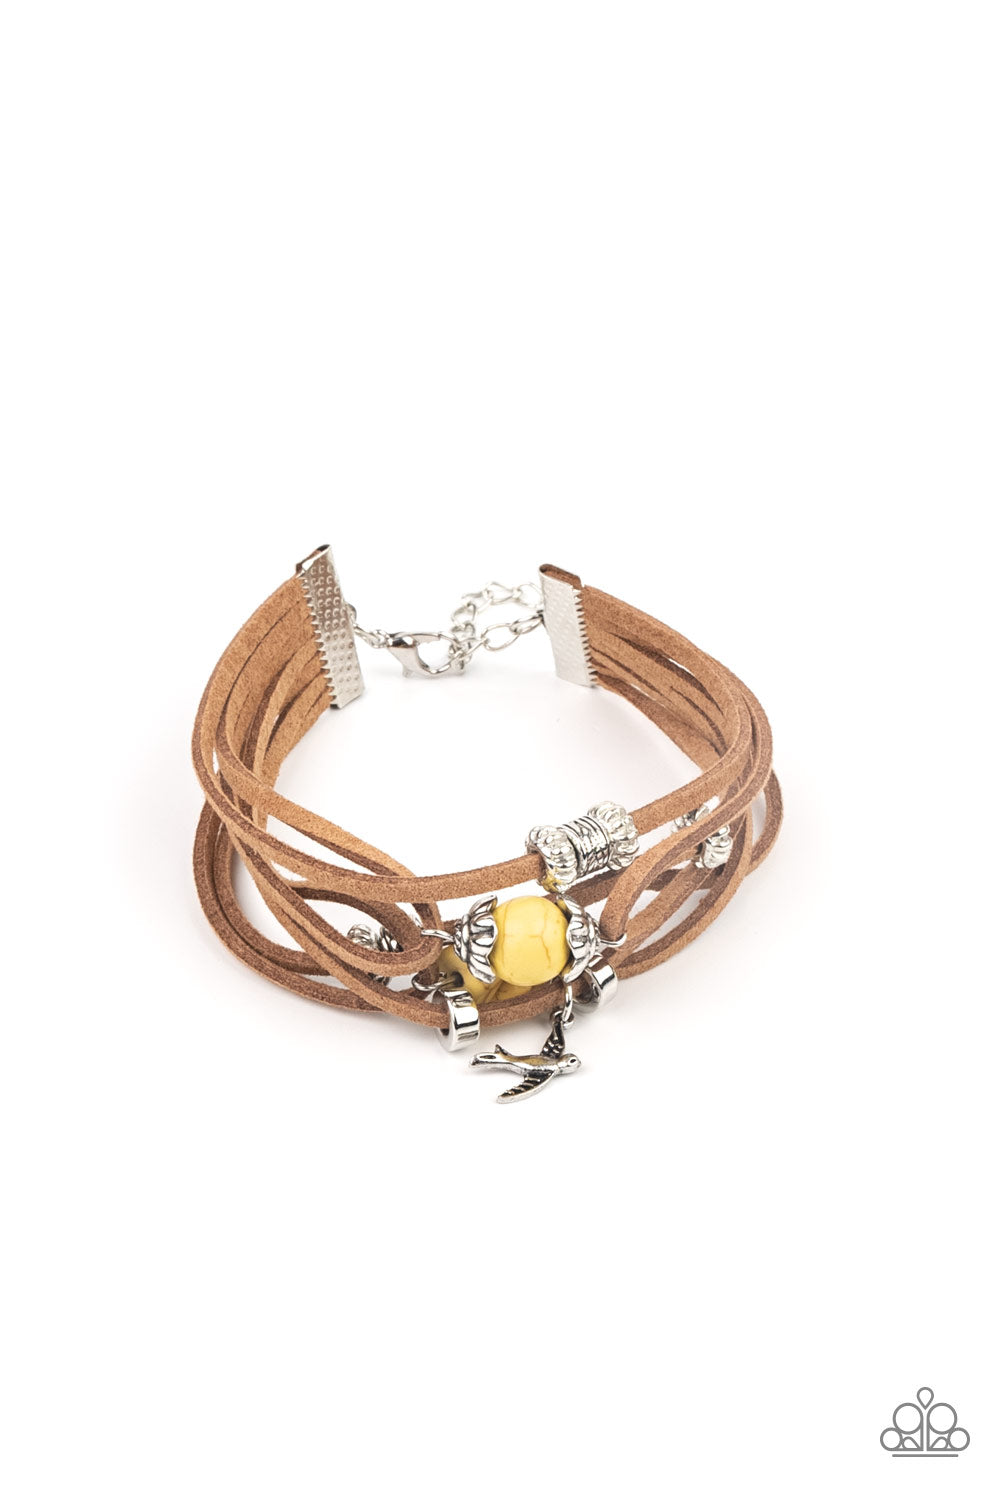 Canyon Flight Yellow Urban Bracelet - Paparazzi Accessories  Infused with a dainty silver bird charm, dainty strands of brown suede are adorned in mismatched silver accents and yellow stones for an earthy layered look. Features an adjustable clasp closure.  All Paparazzi Accessories are lead free and nickel free!  Sold as one individual bracelet.